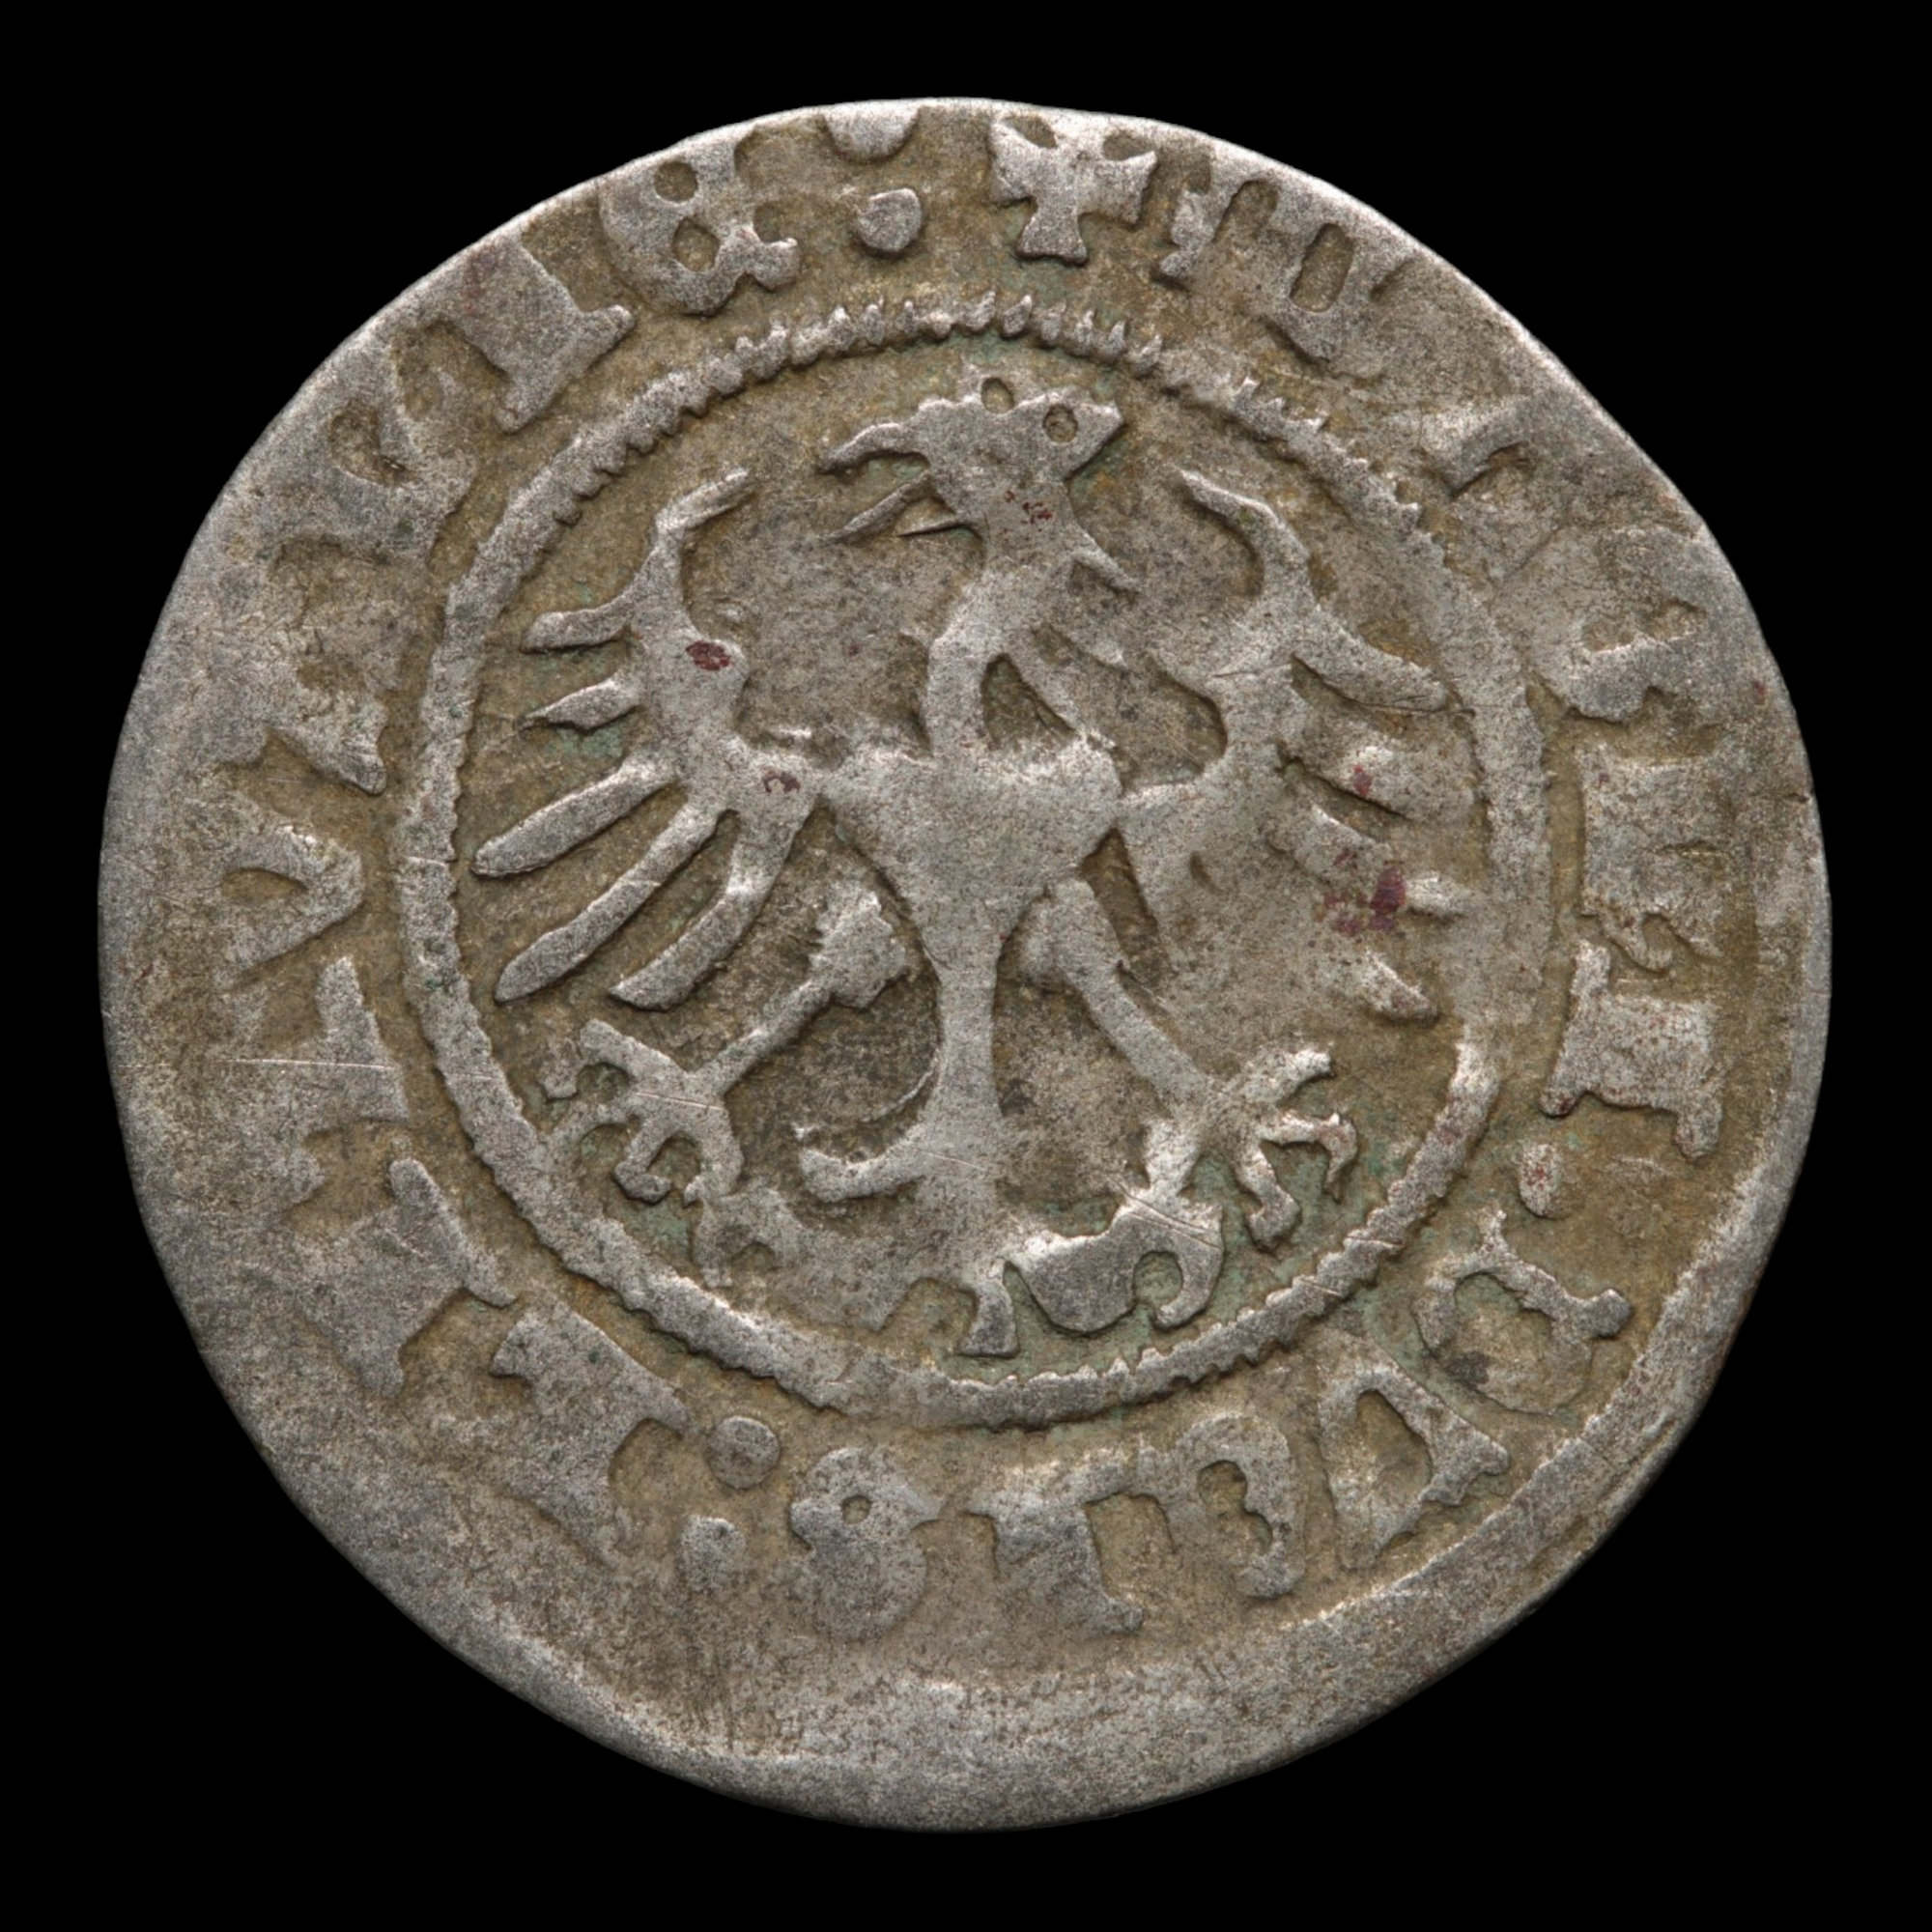 Grand Duchy of Lithuania, Sigismund I, Half Groat  - 1511 CE - Eastern Europe - 10/19/23 Auction